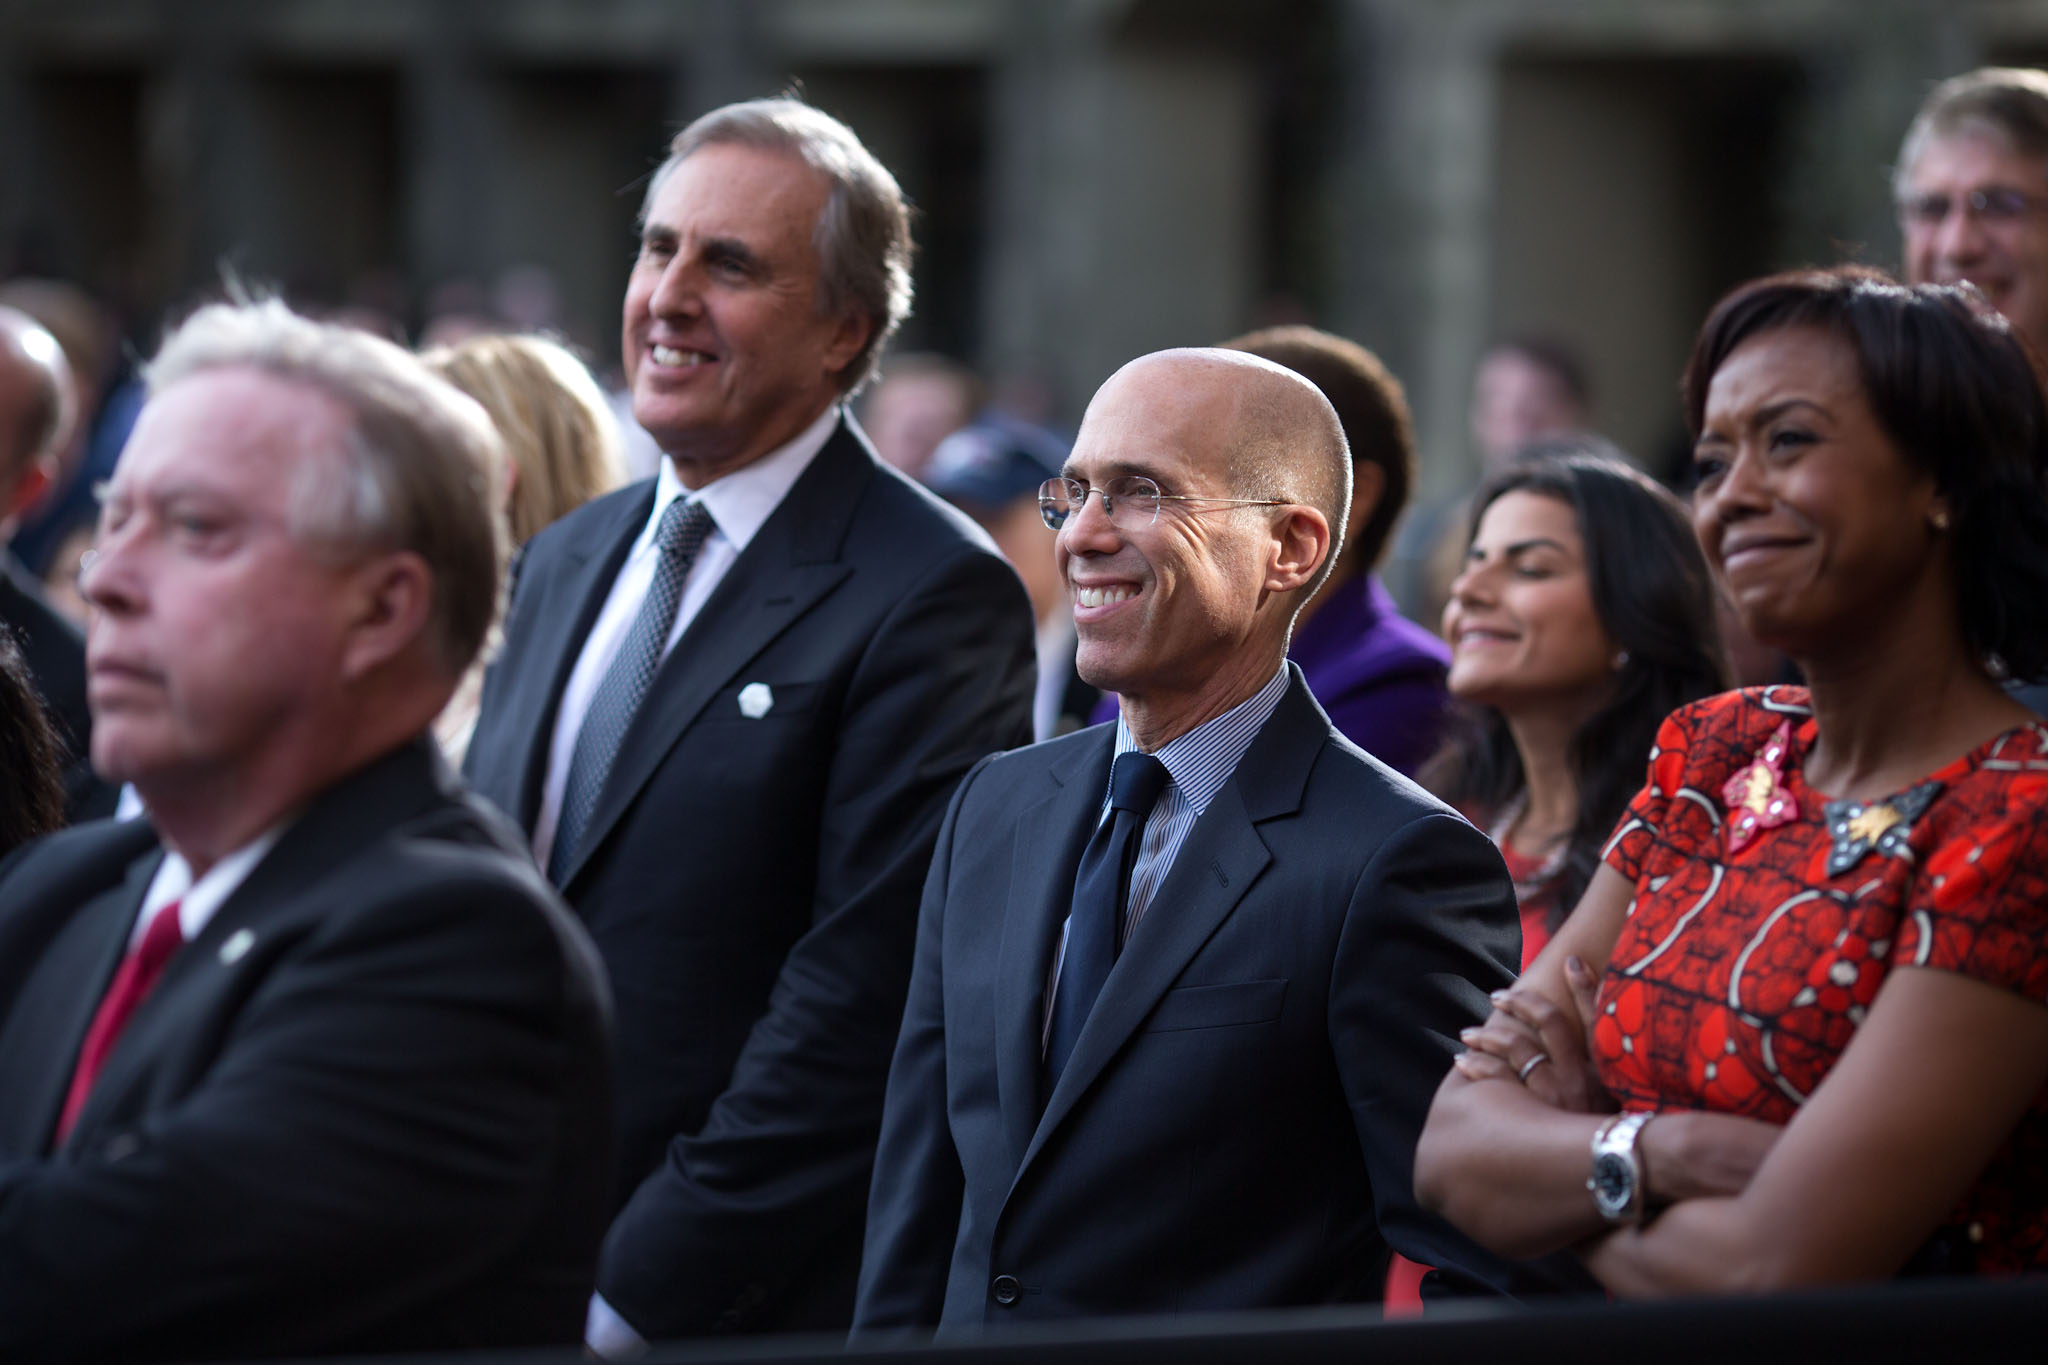 Jeffrey Katzenburg, third from left, listens with others as President Barack Obama delivers remarks on the economy to employees at the DreamWorks Animation SKG movie studio in Glendale, Calif., Nov. 26, 2013. Mellody Hobson is at right.